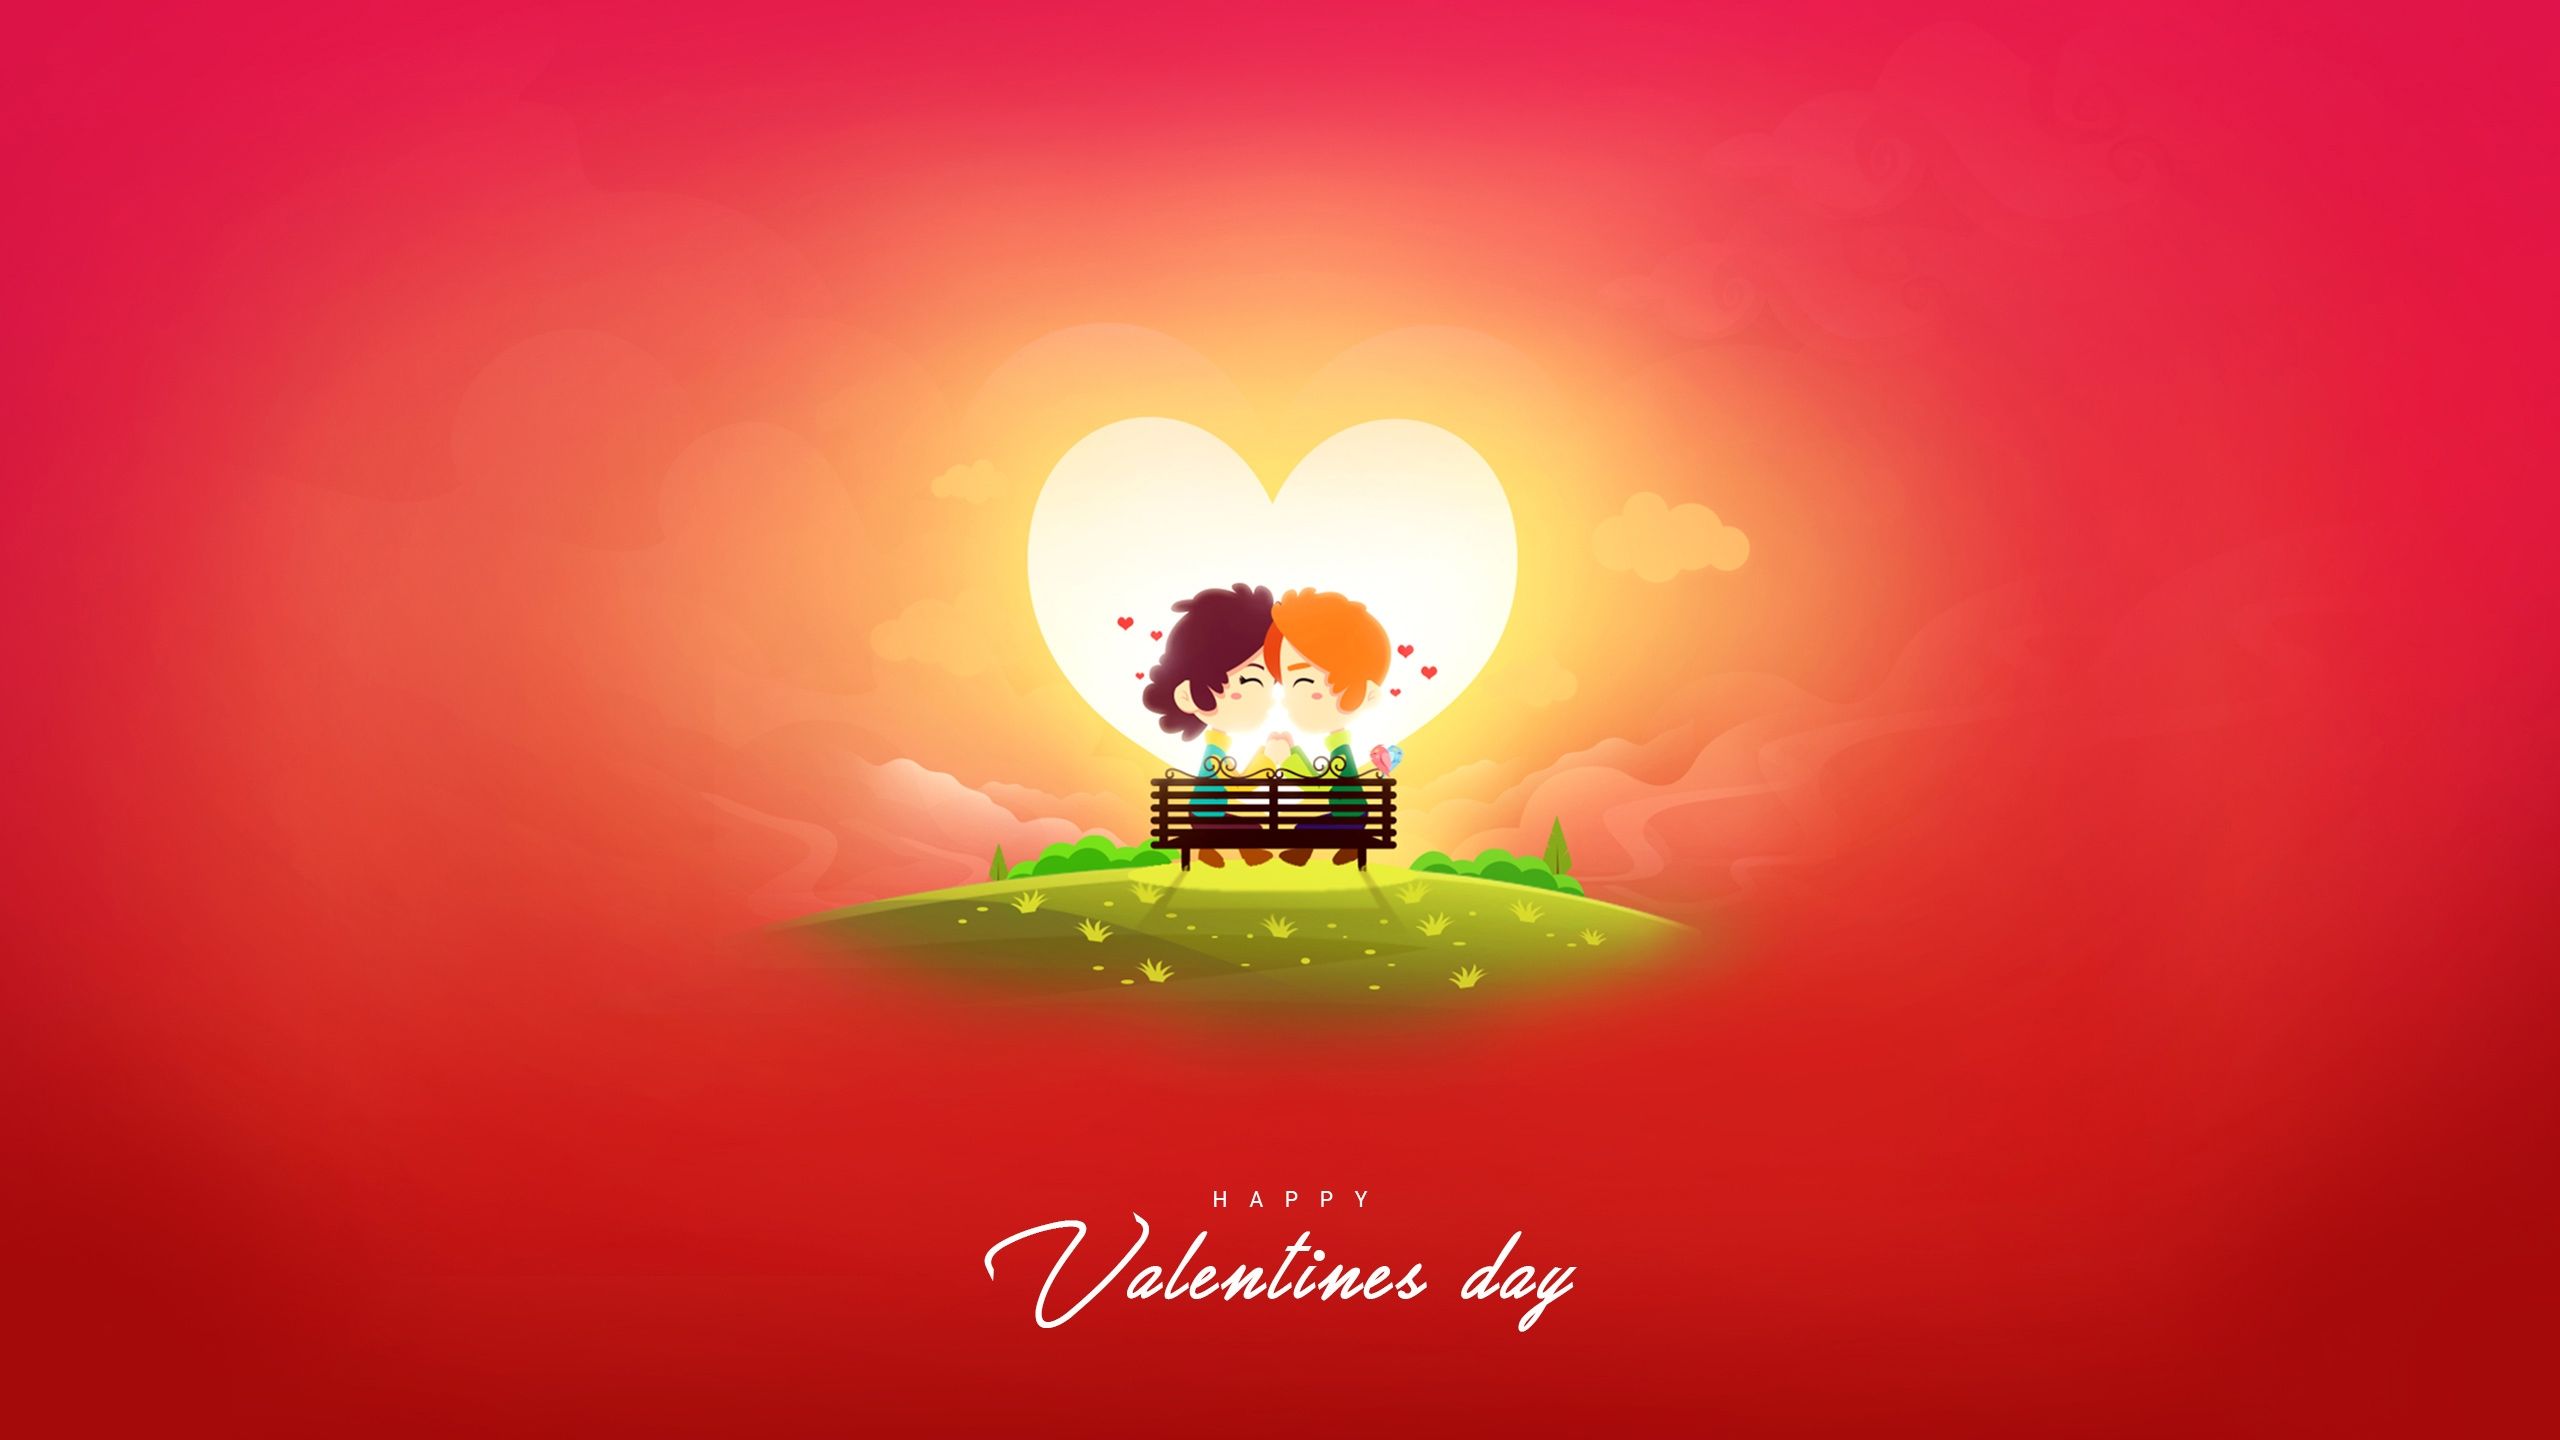 Download 2560x1440 Valentine's Day, Couple, Heart, Cute, Cartoon Wallpaper for iMac 27 inch